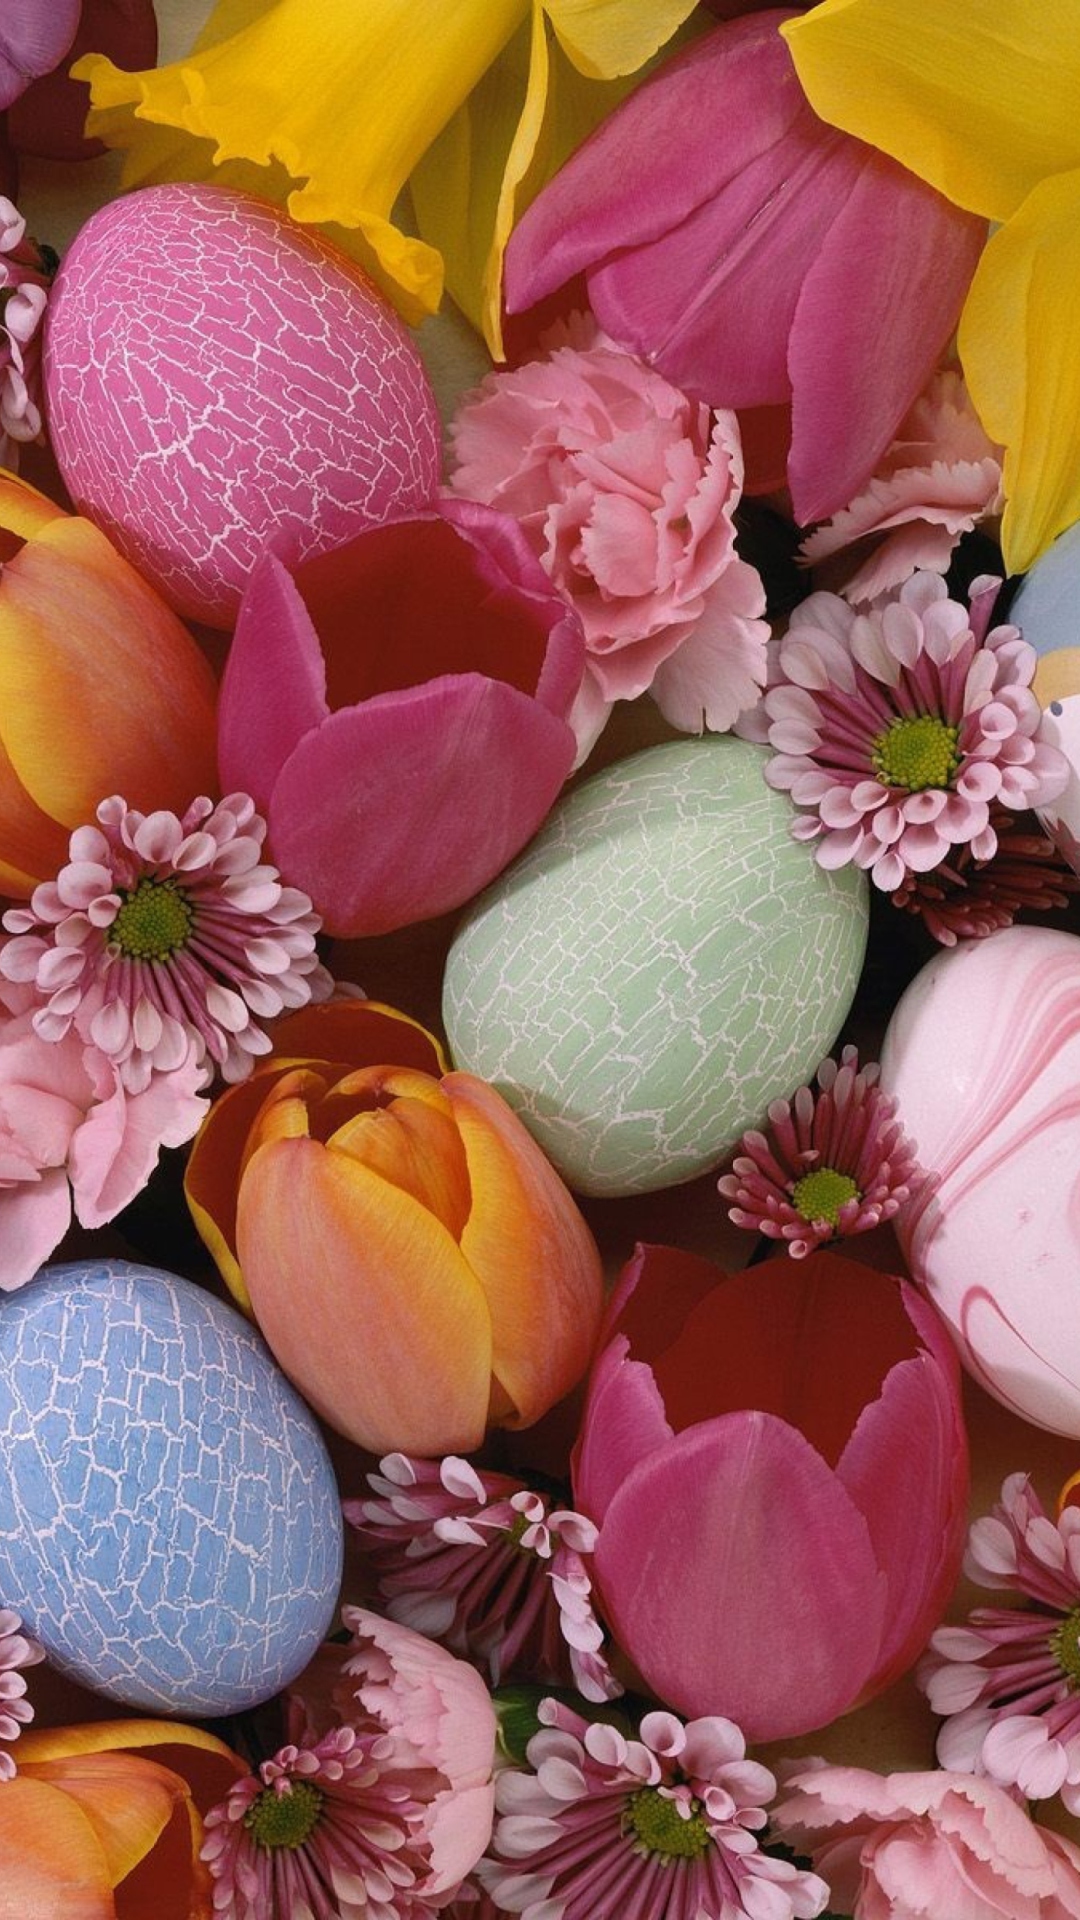 Easter Eggs And Flowers wallpaper 1080x1920